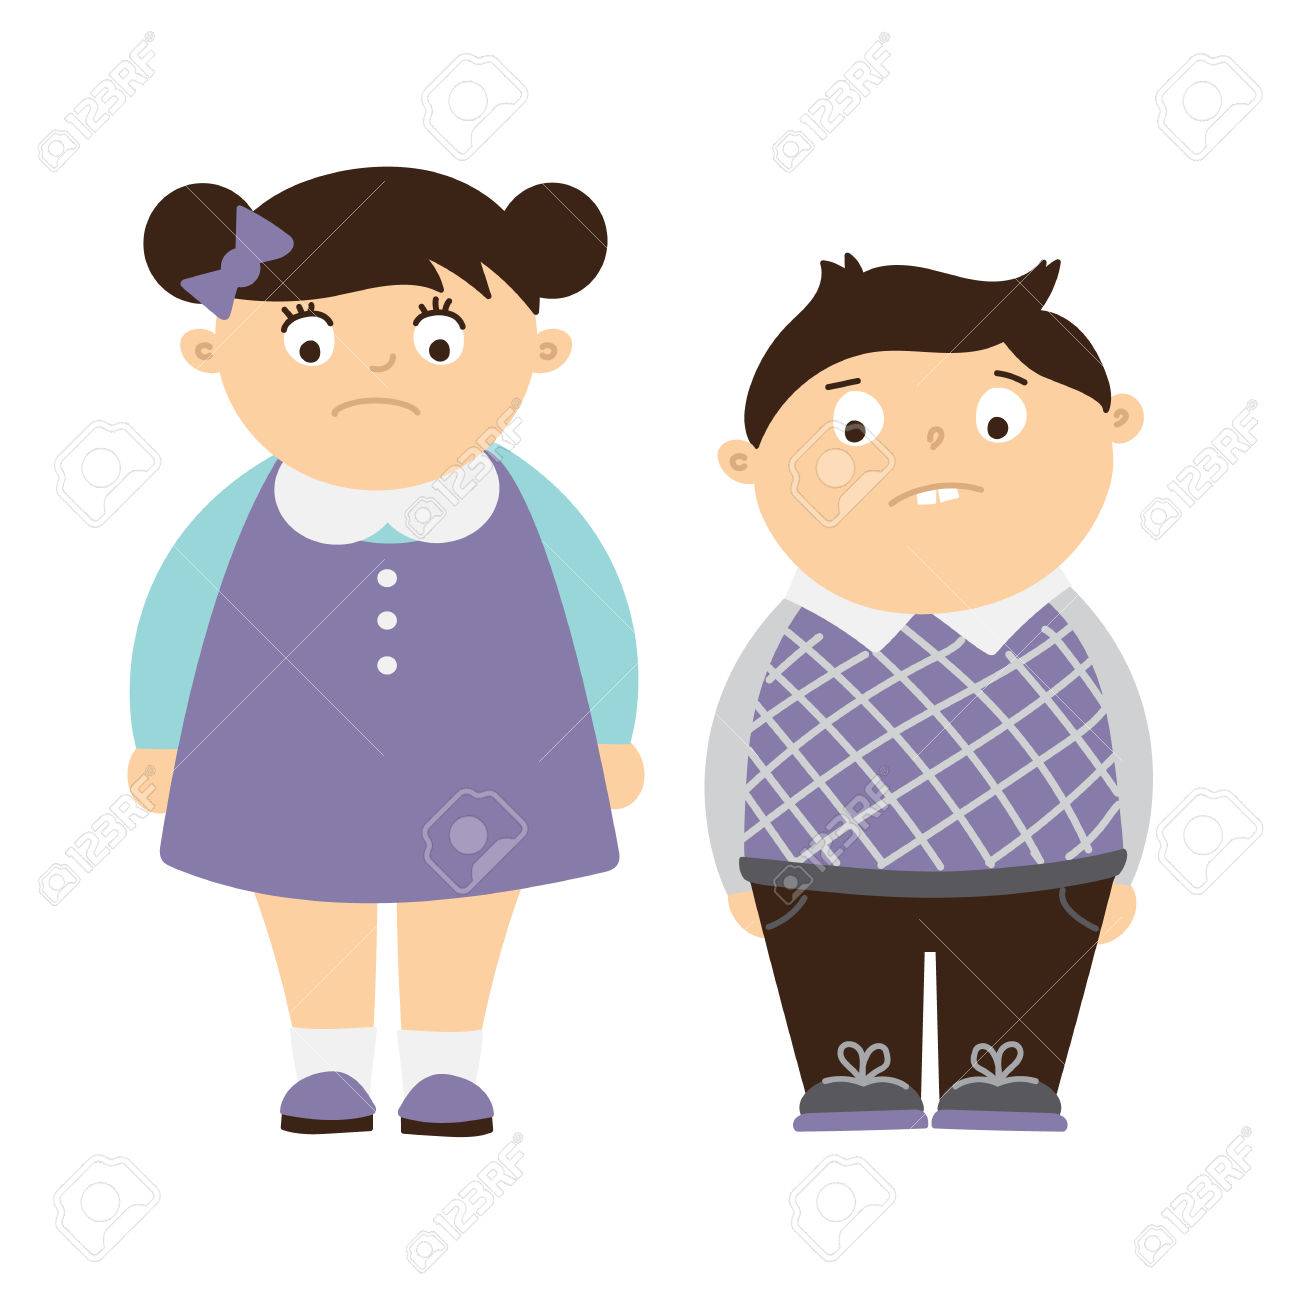 Isolated Sad Fat Children On White Background Concept Of